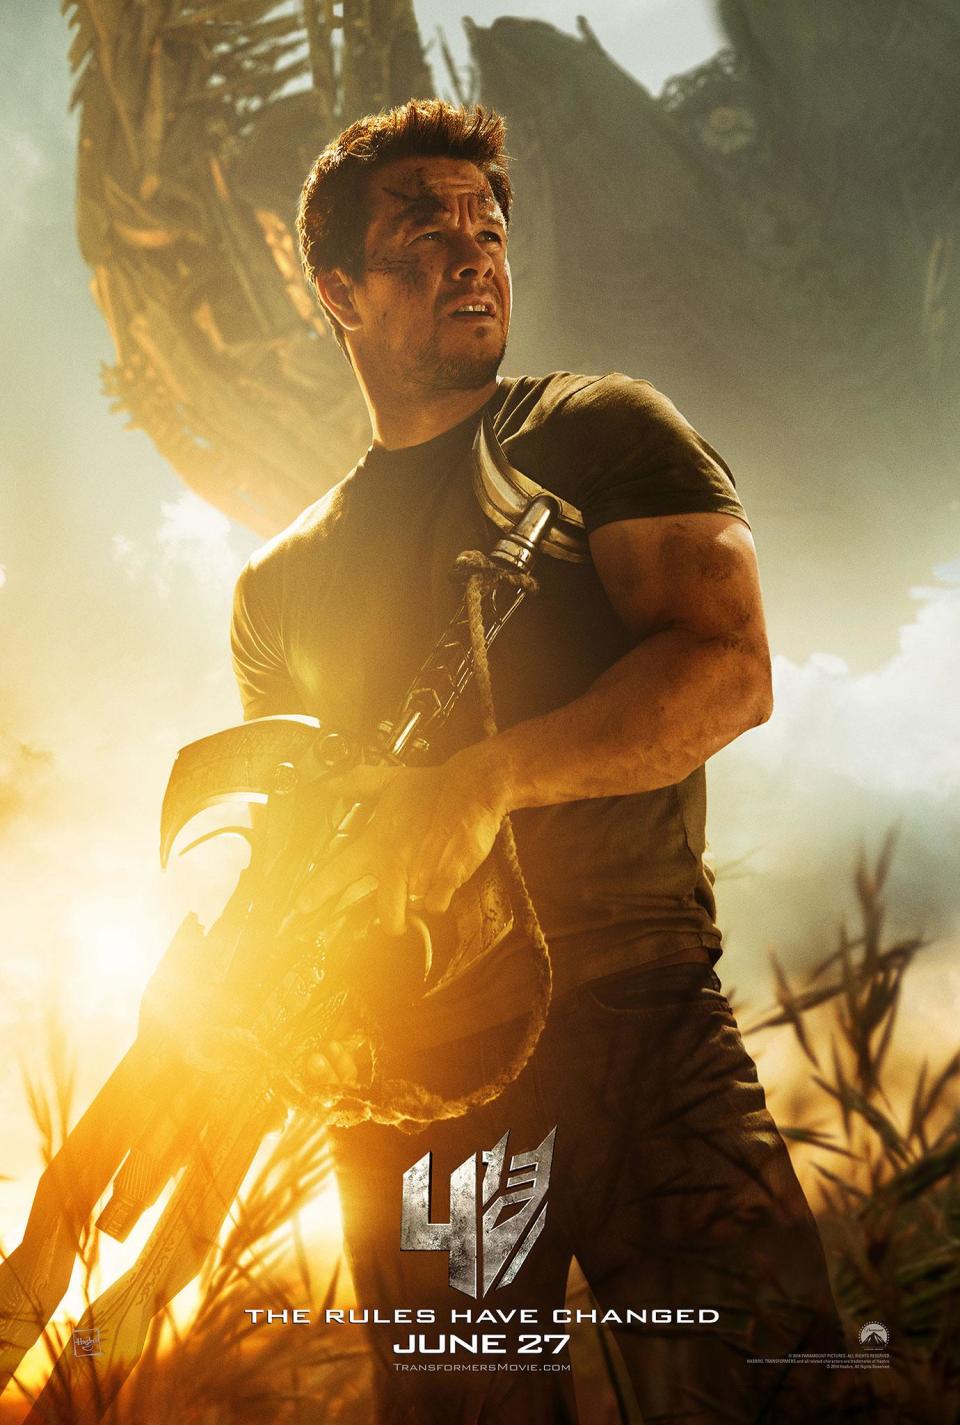 Mark Wahlberg in 'Transformers: Age of Extinction' (Paramount Pictures)